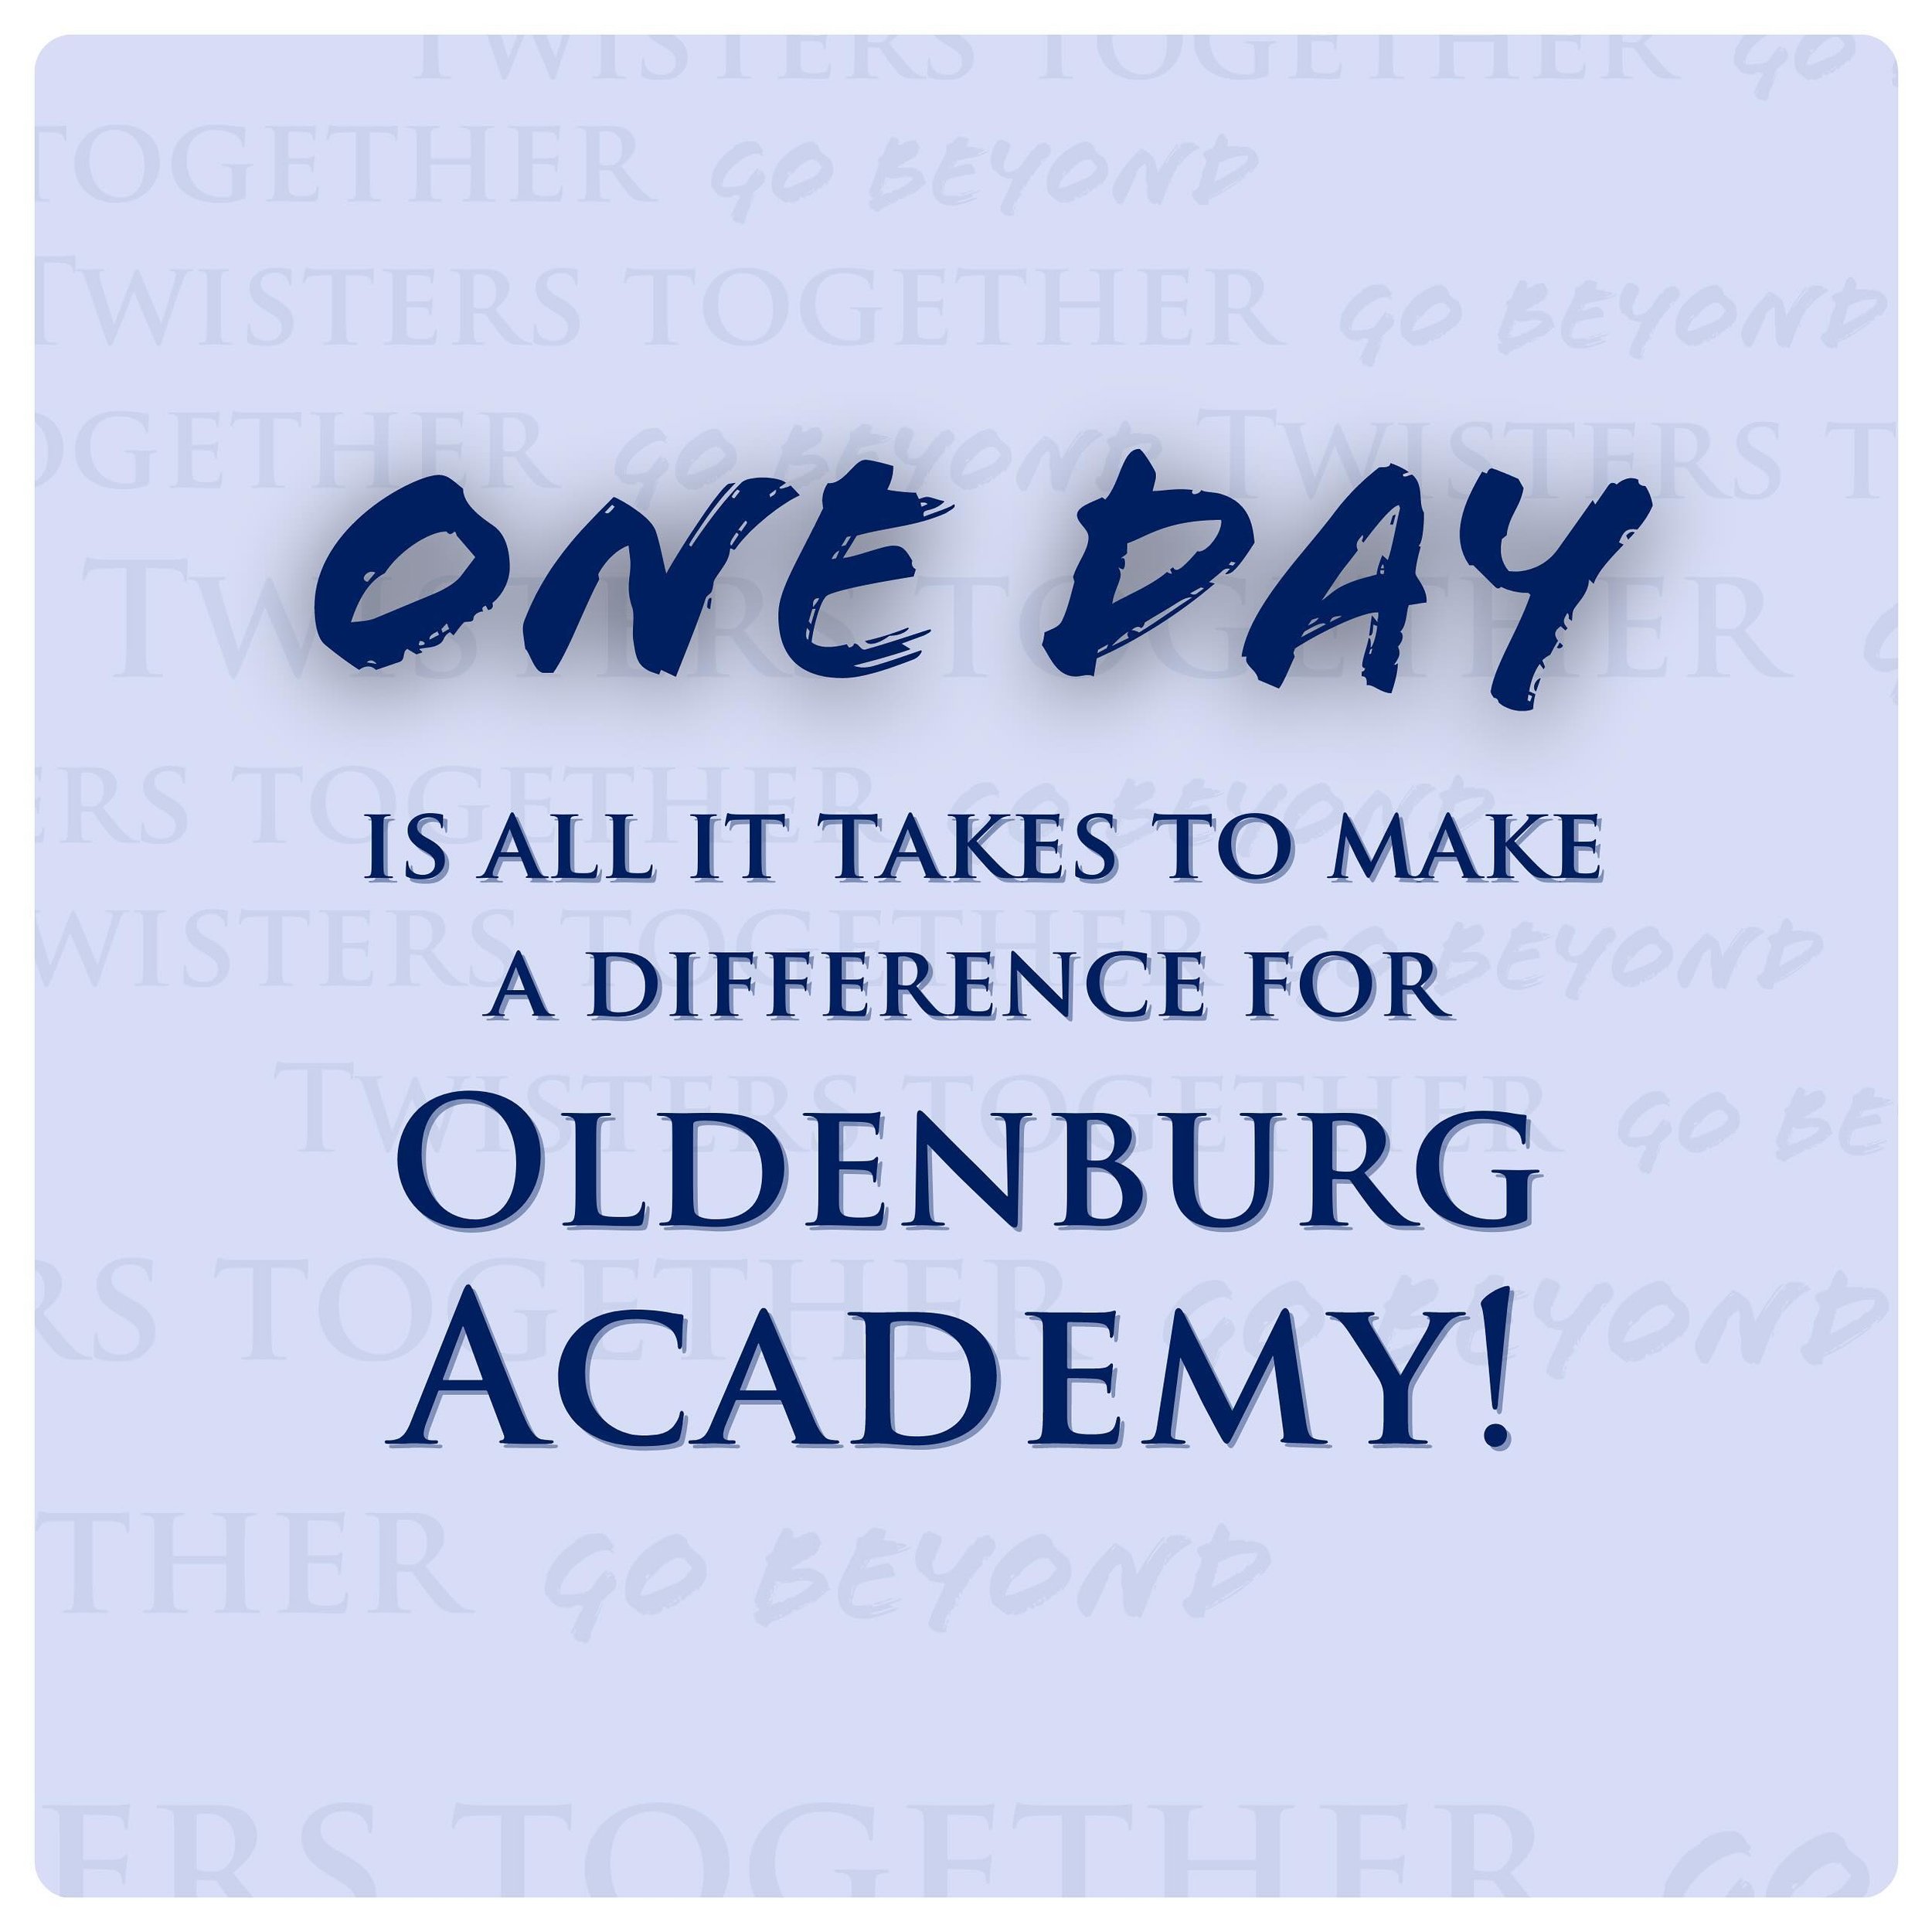 We are only a week away from One Day @ OA&mdash;our annual day of giving! 

We hope you will join in on the fun on May 3rd!